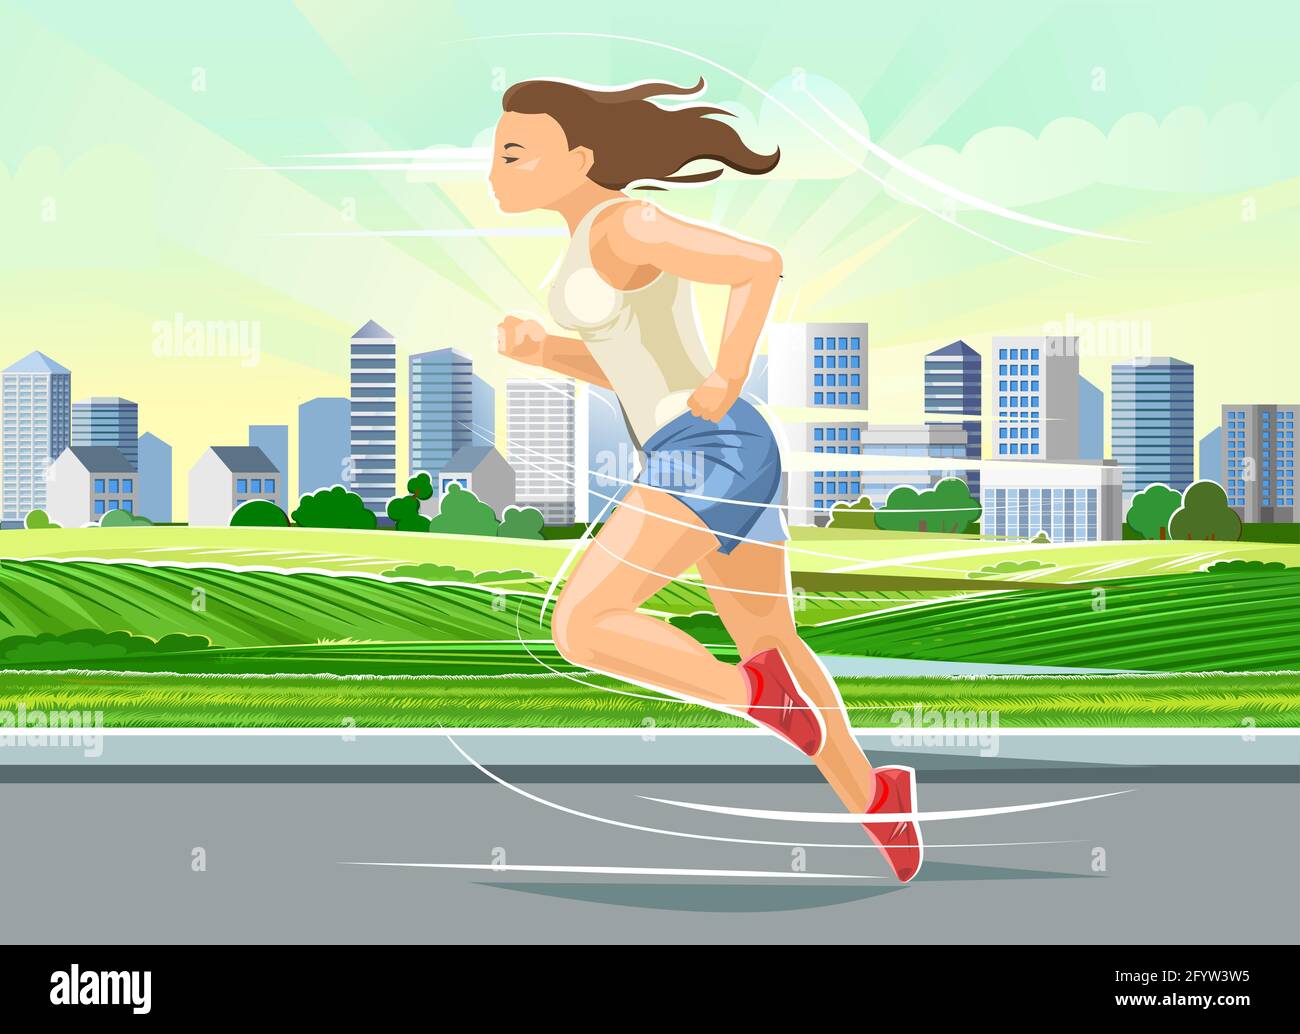 The girl runs. Sports running. Fitness and healthy lifestyle. Flat cartoon style. Woman runner trains against the backdrop of a large modern city. Vec Stock Vector